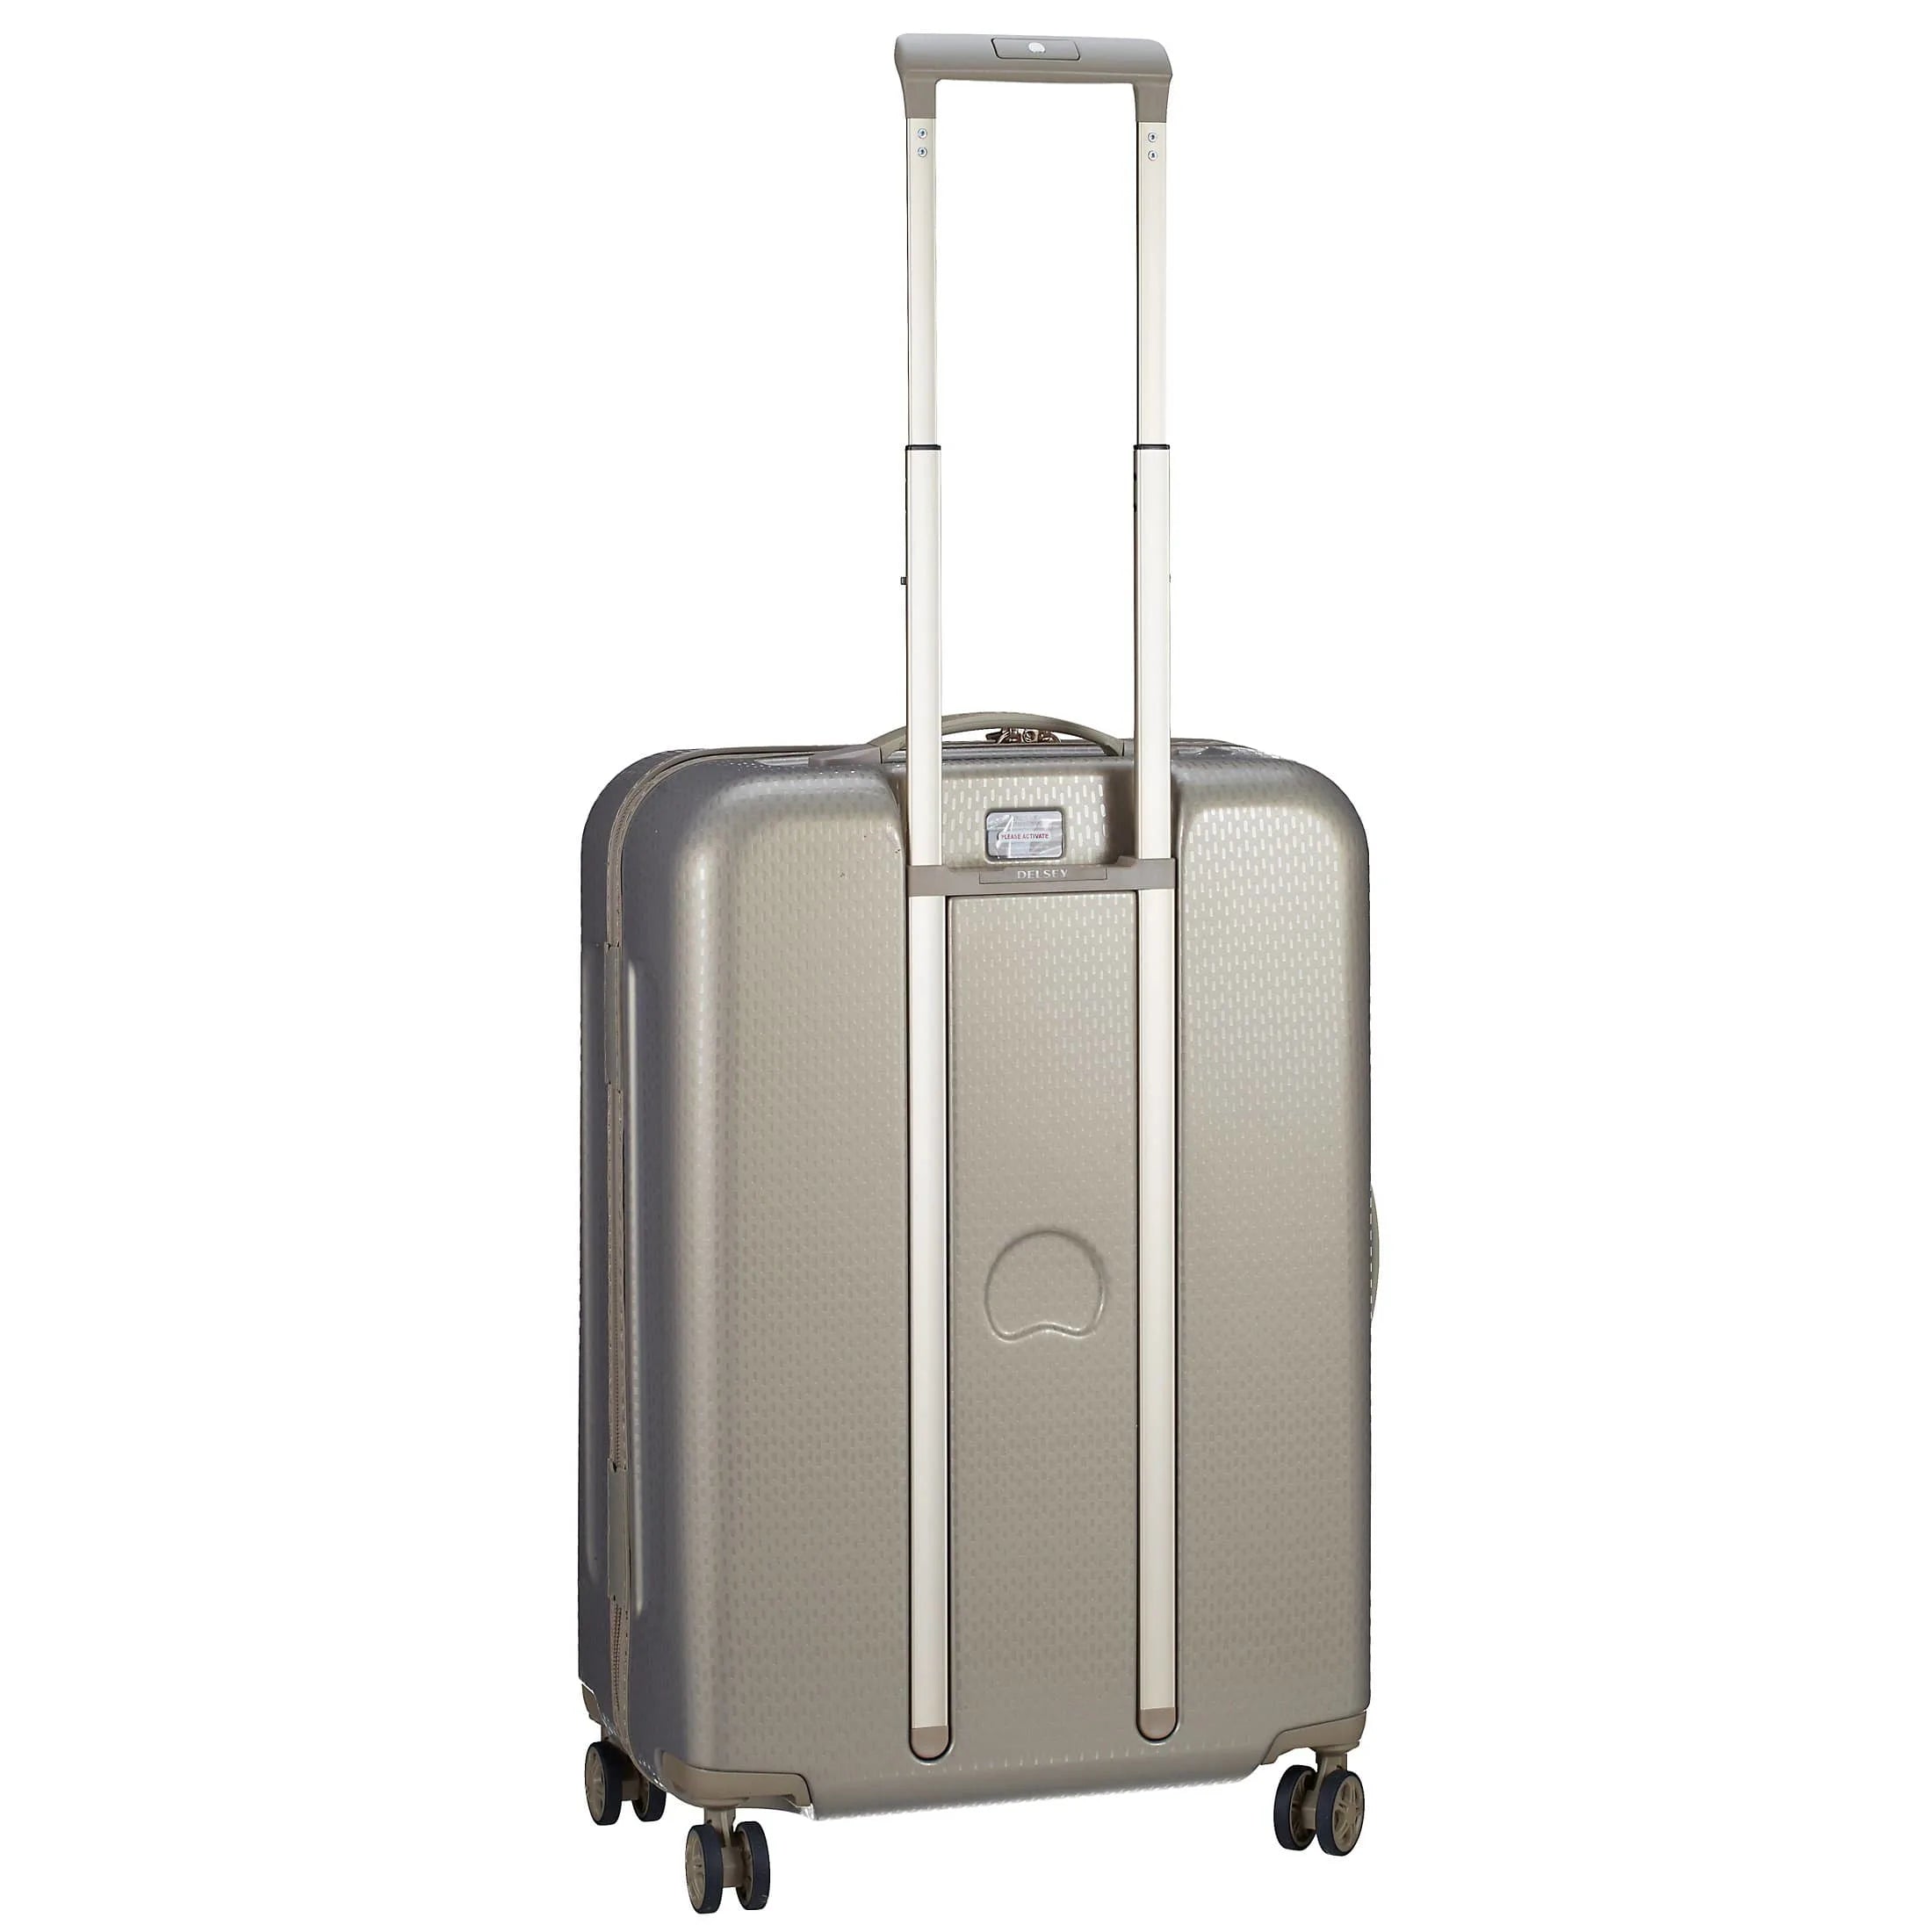 Delsey Turenne trolley 4 roues 65 cm - argent